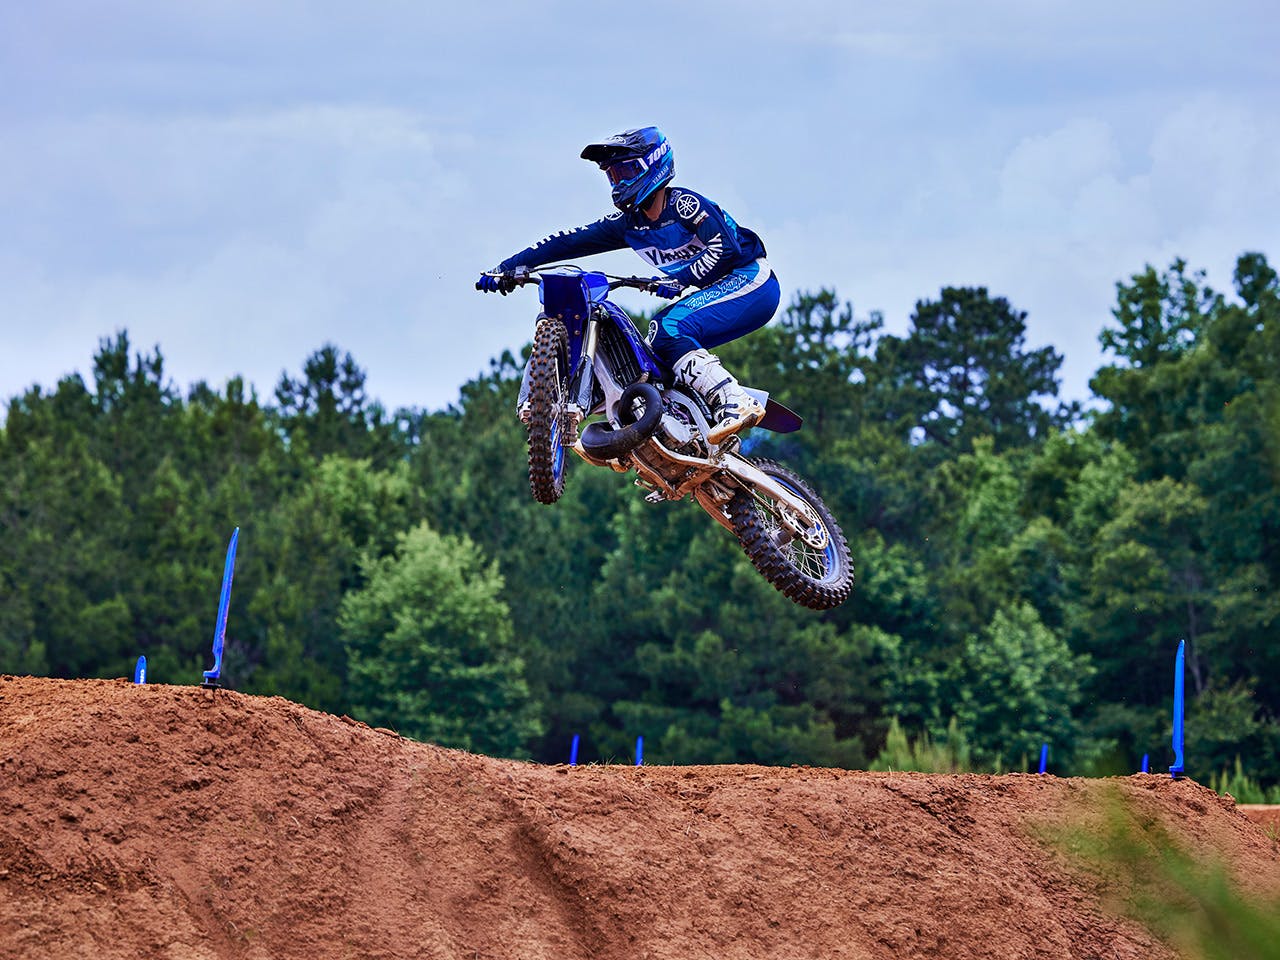 Yamaha YZ250 in team yamaha blue colour, being ridden off-track